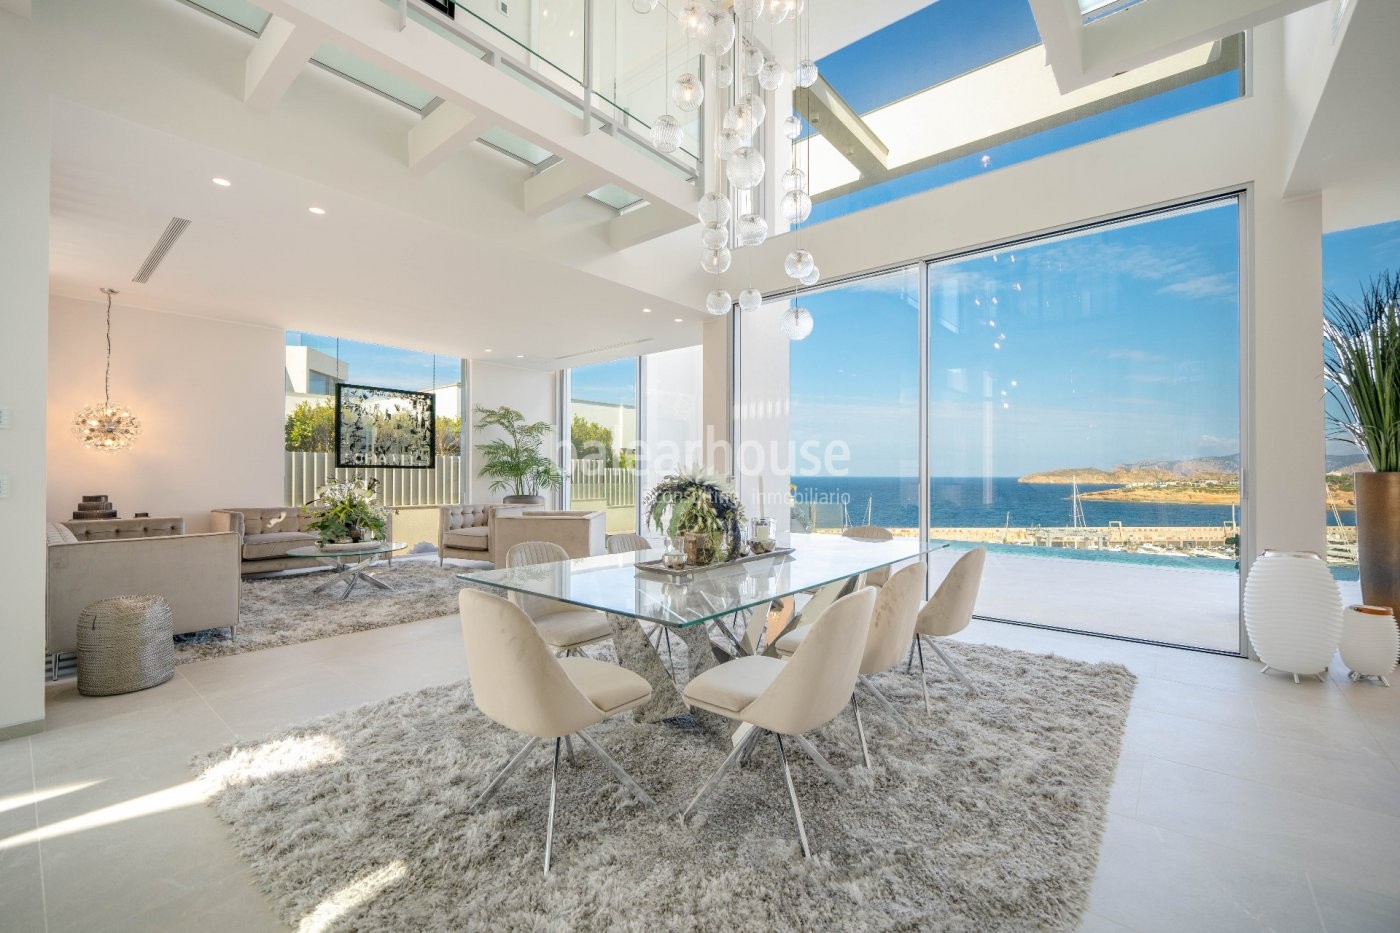 Sensational newly built villa in Port Adriano, which stretches out like a great lookout to the sea